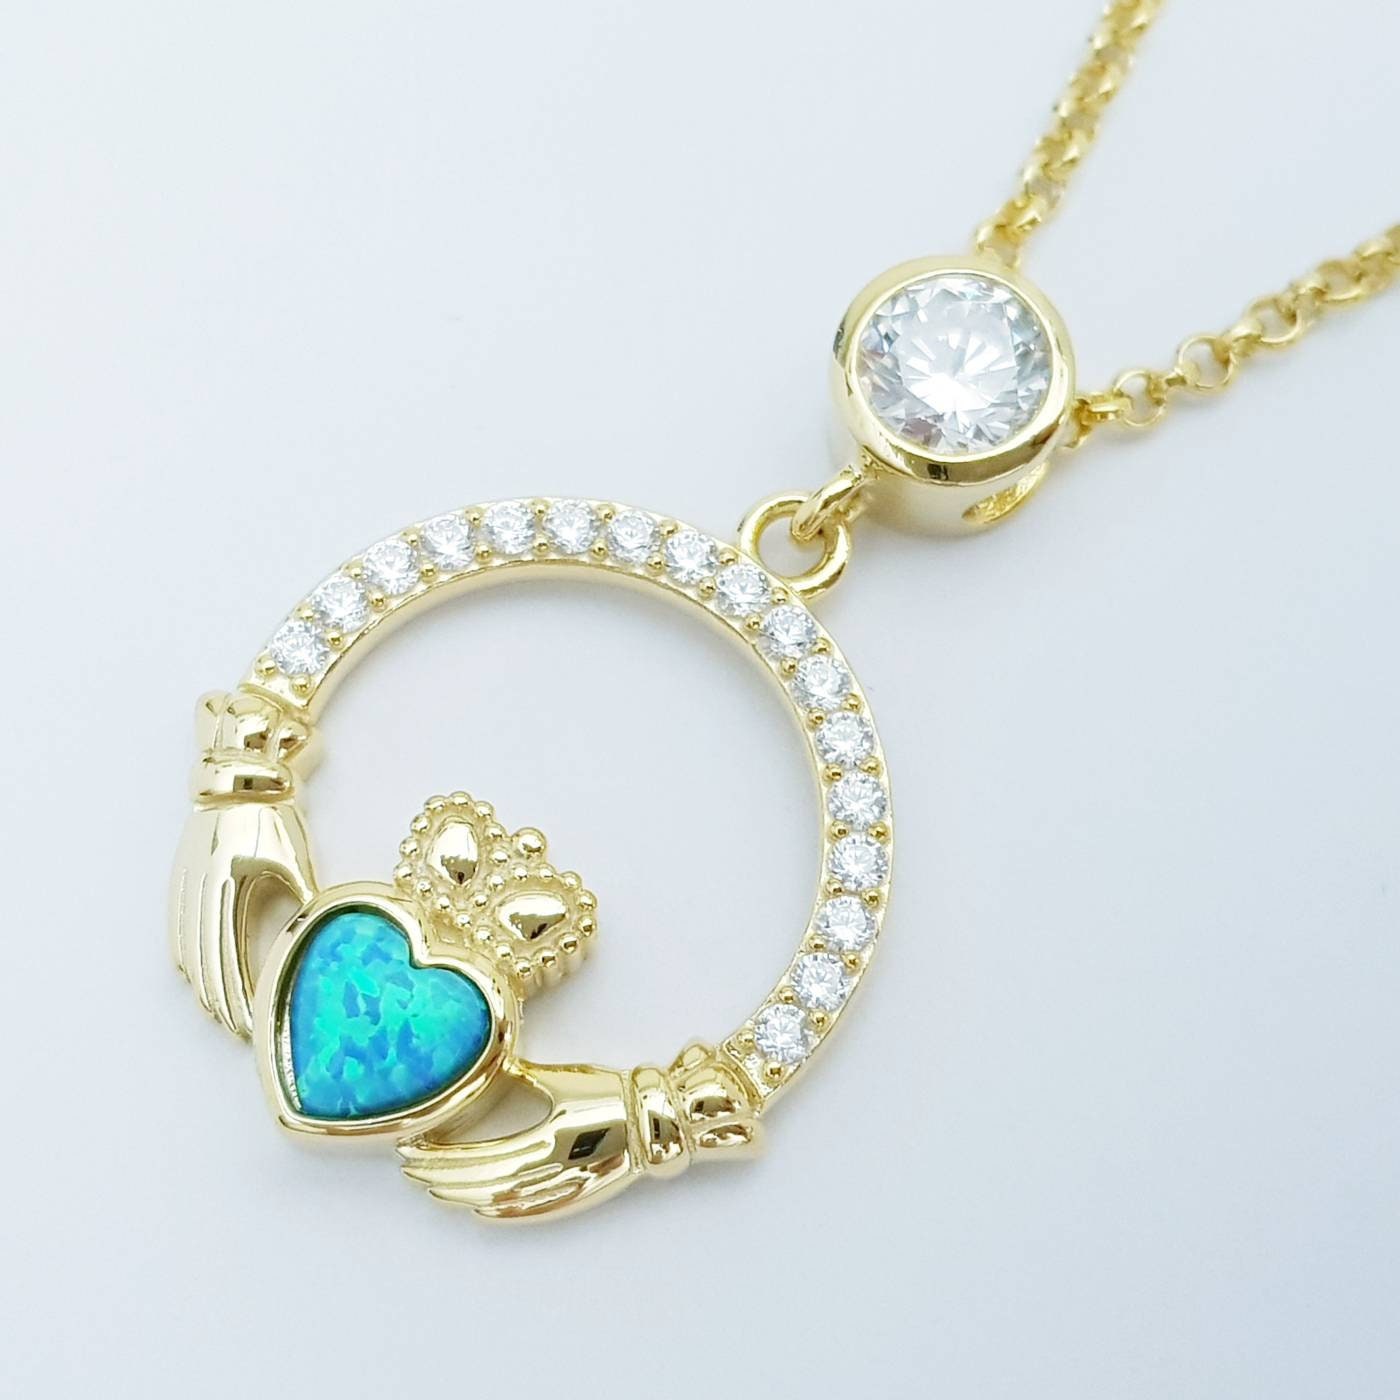 Opal Claddagh pendant, claddagh necklace, yellow gold plated claddagh pendant